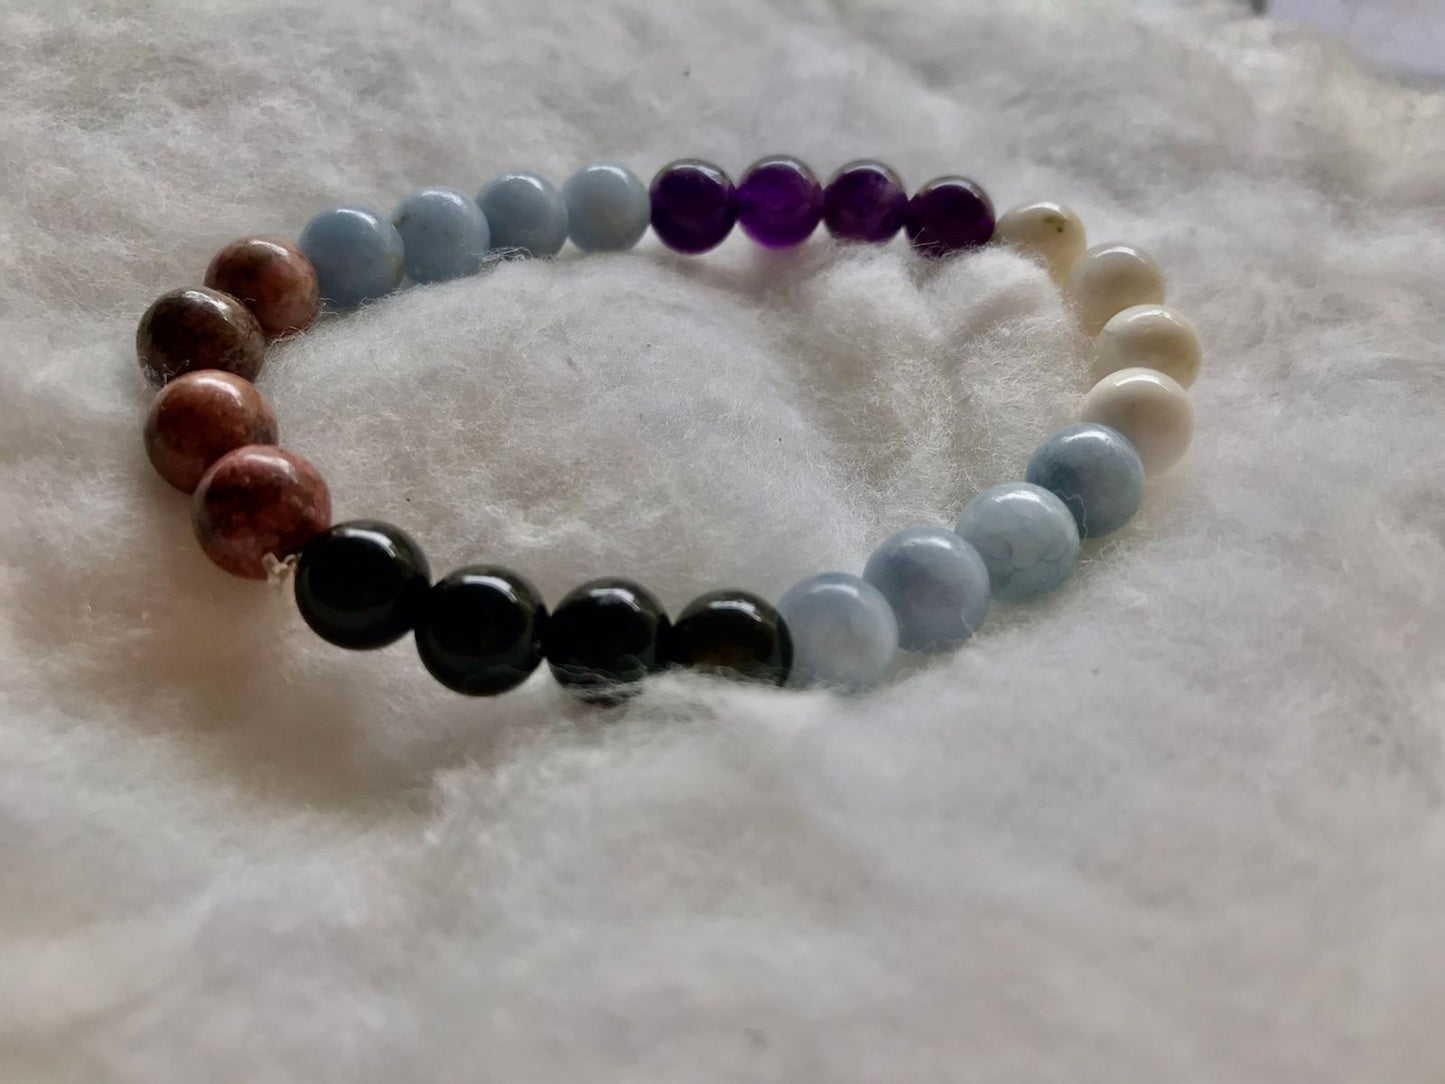 GRIEF & LOSS BRACELETS | Healing Hearts, Nurturing Hope Amidst Grief and Loss